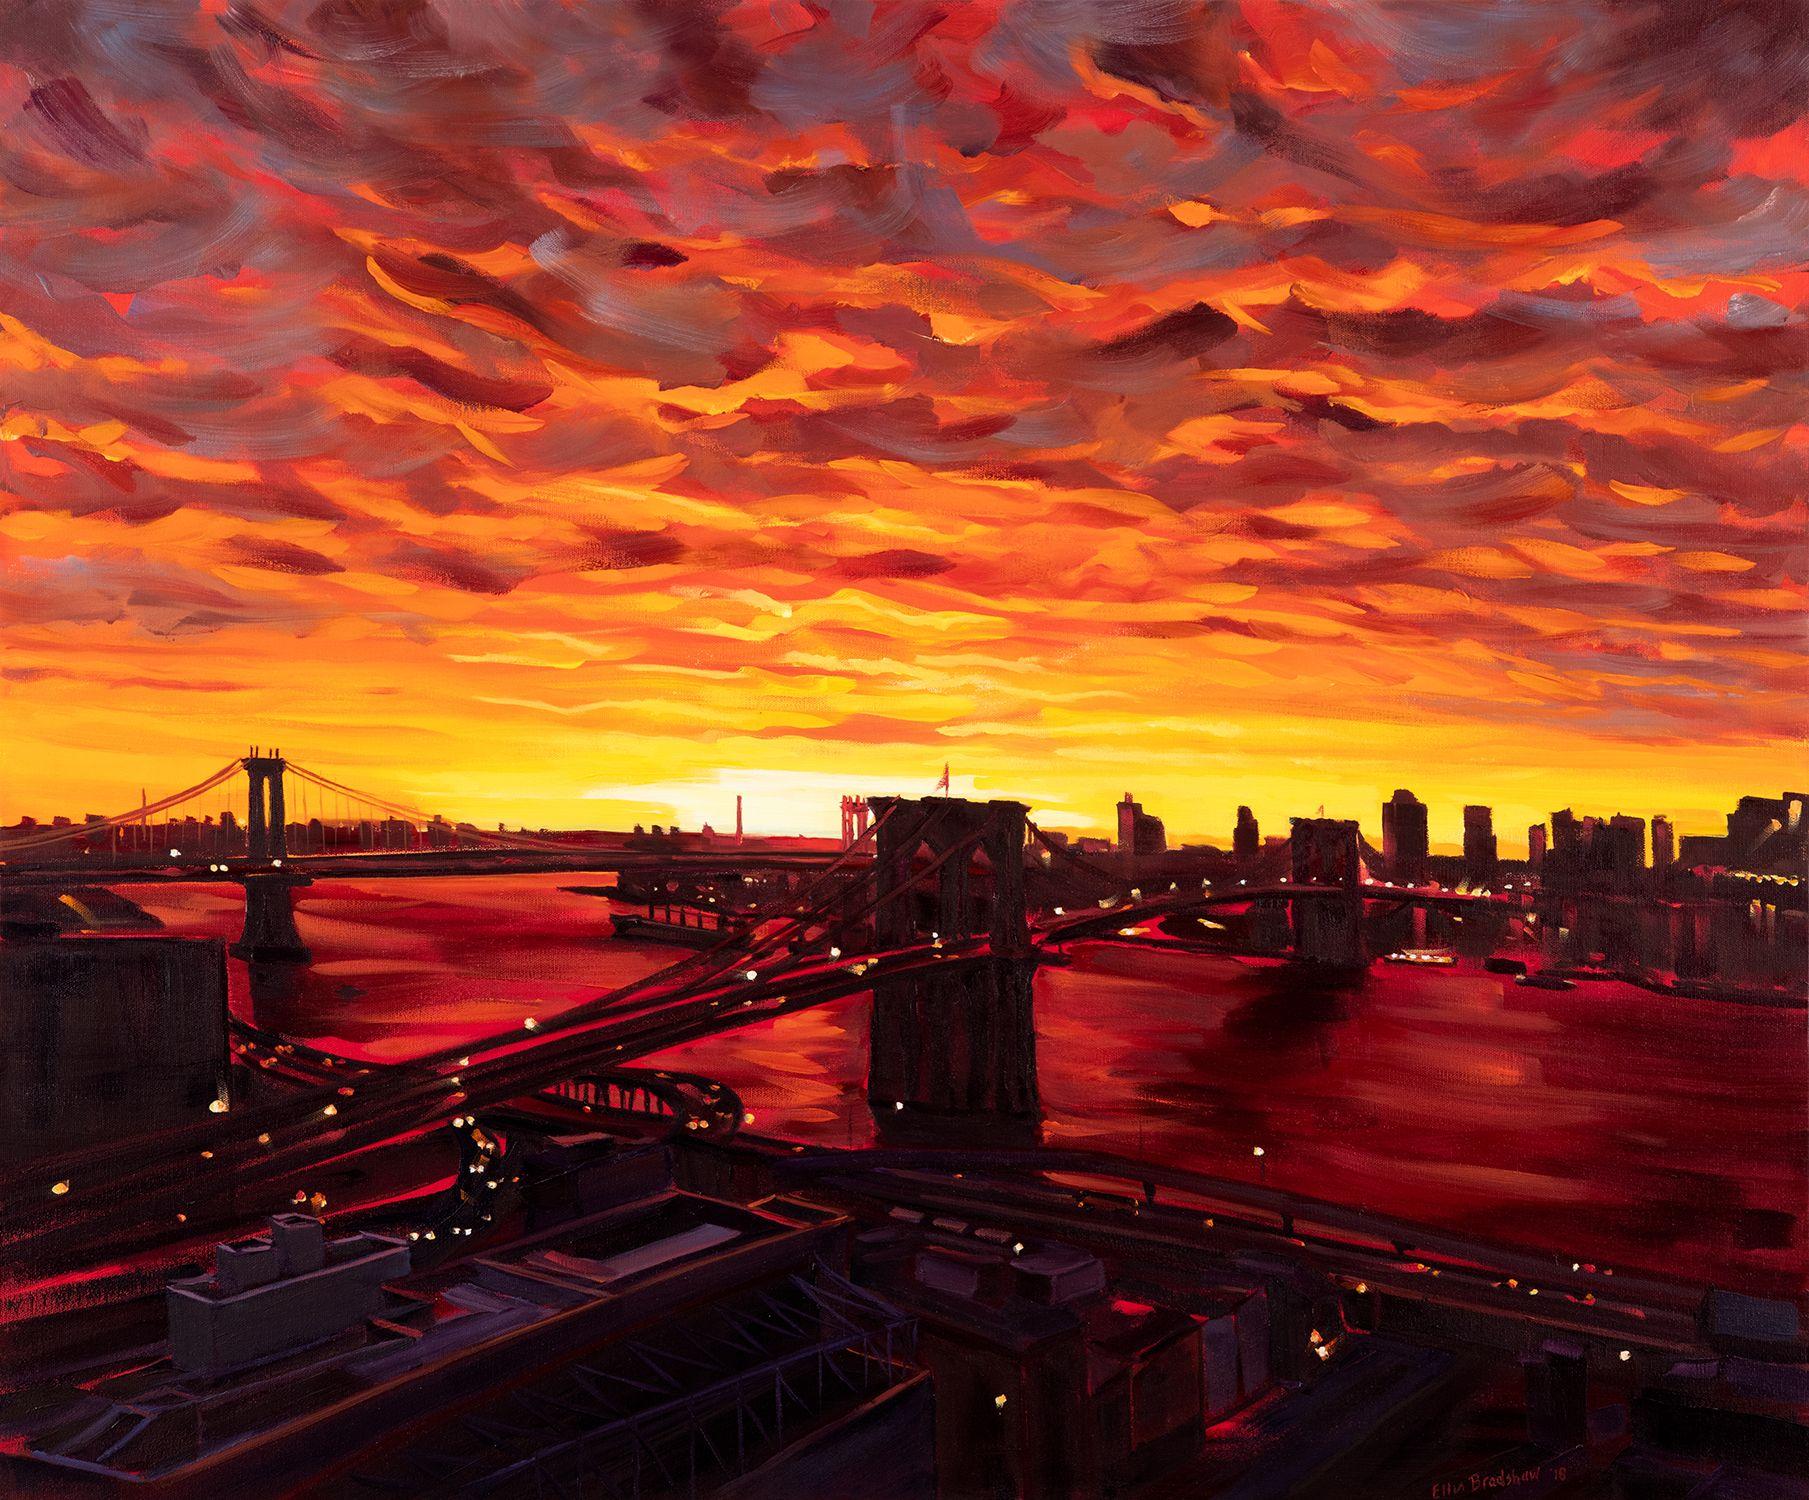 A very dramatic stunning sunrise from the artist's 25th floor balcony overlooking the Brooklyn and Manhattan Bridges! The intensity of the fiery sky was overpowering and spectacular, leaving the viewer breathless! What an exhilarating challenge to